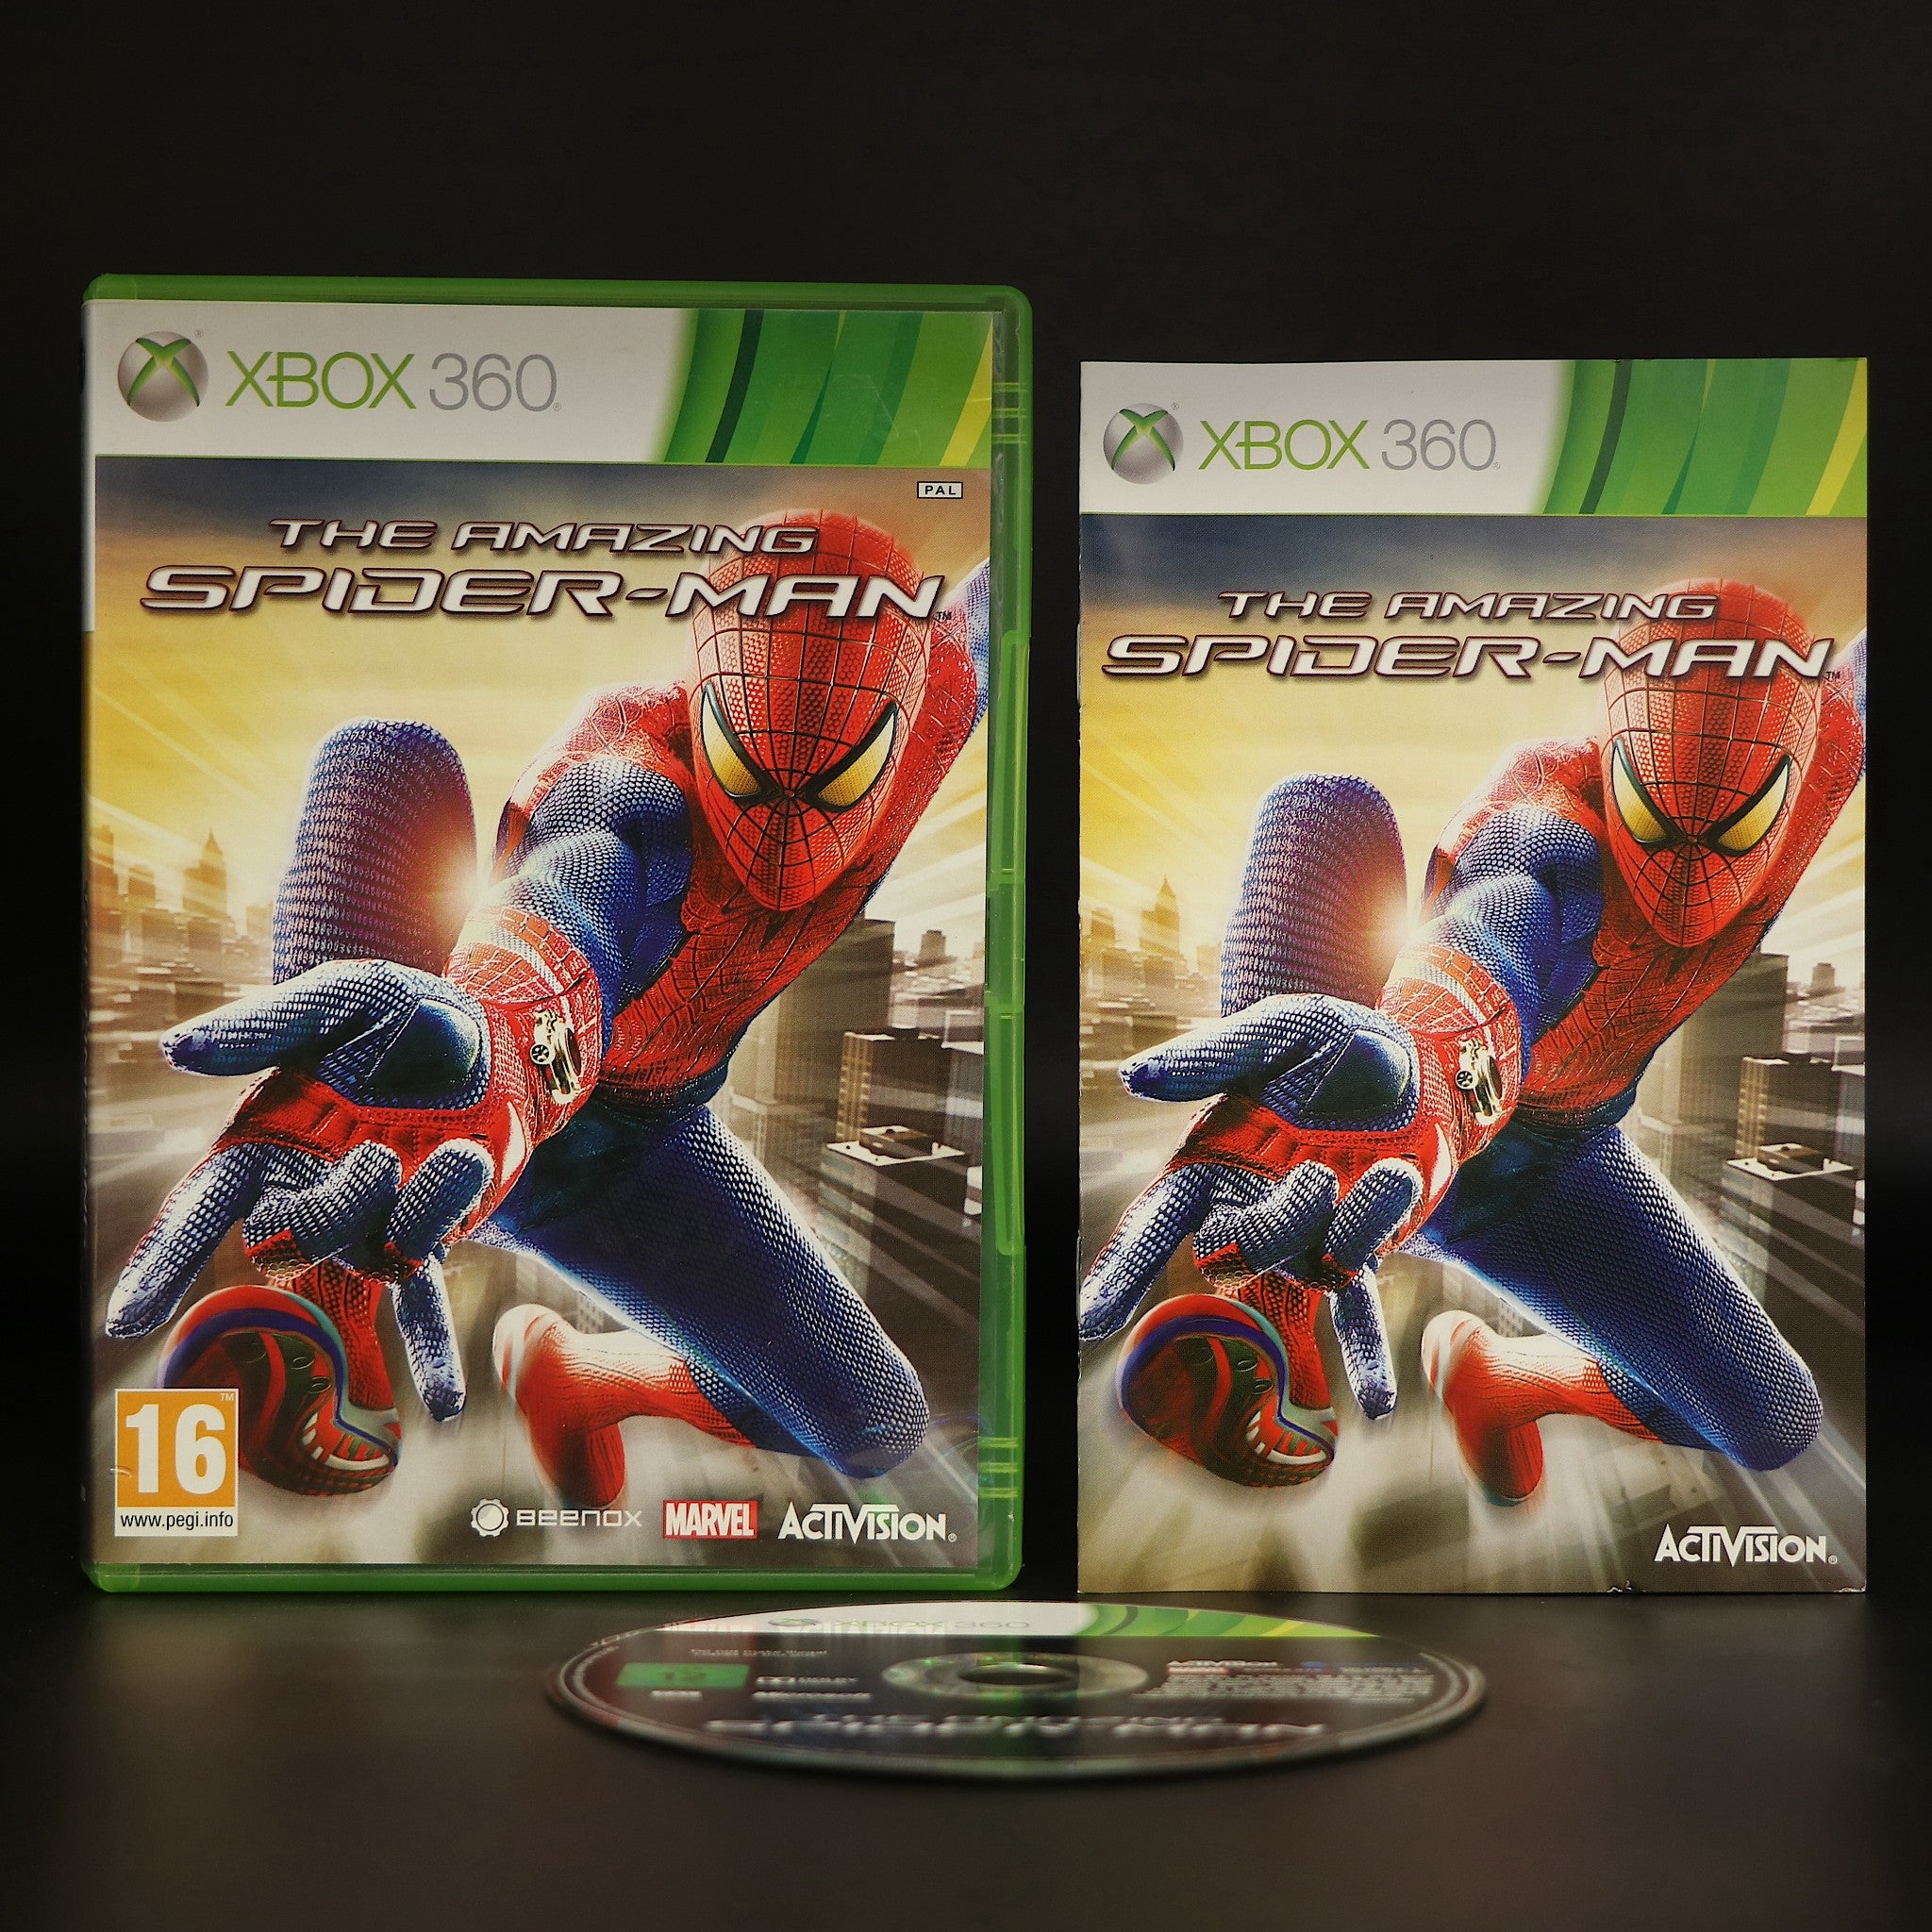 Amazing Spiderman | Microsoft Xbox 360 Game | Collectable Condition